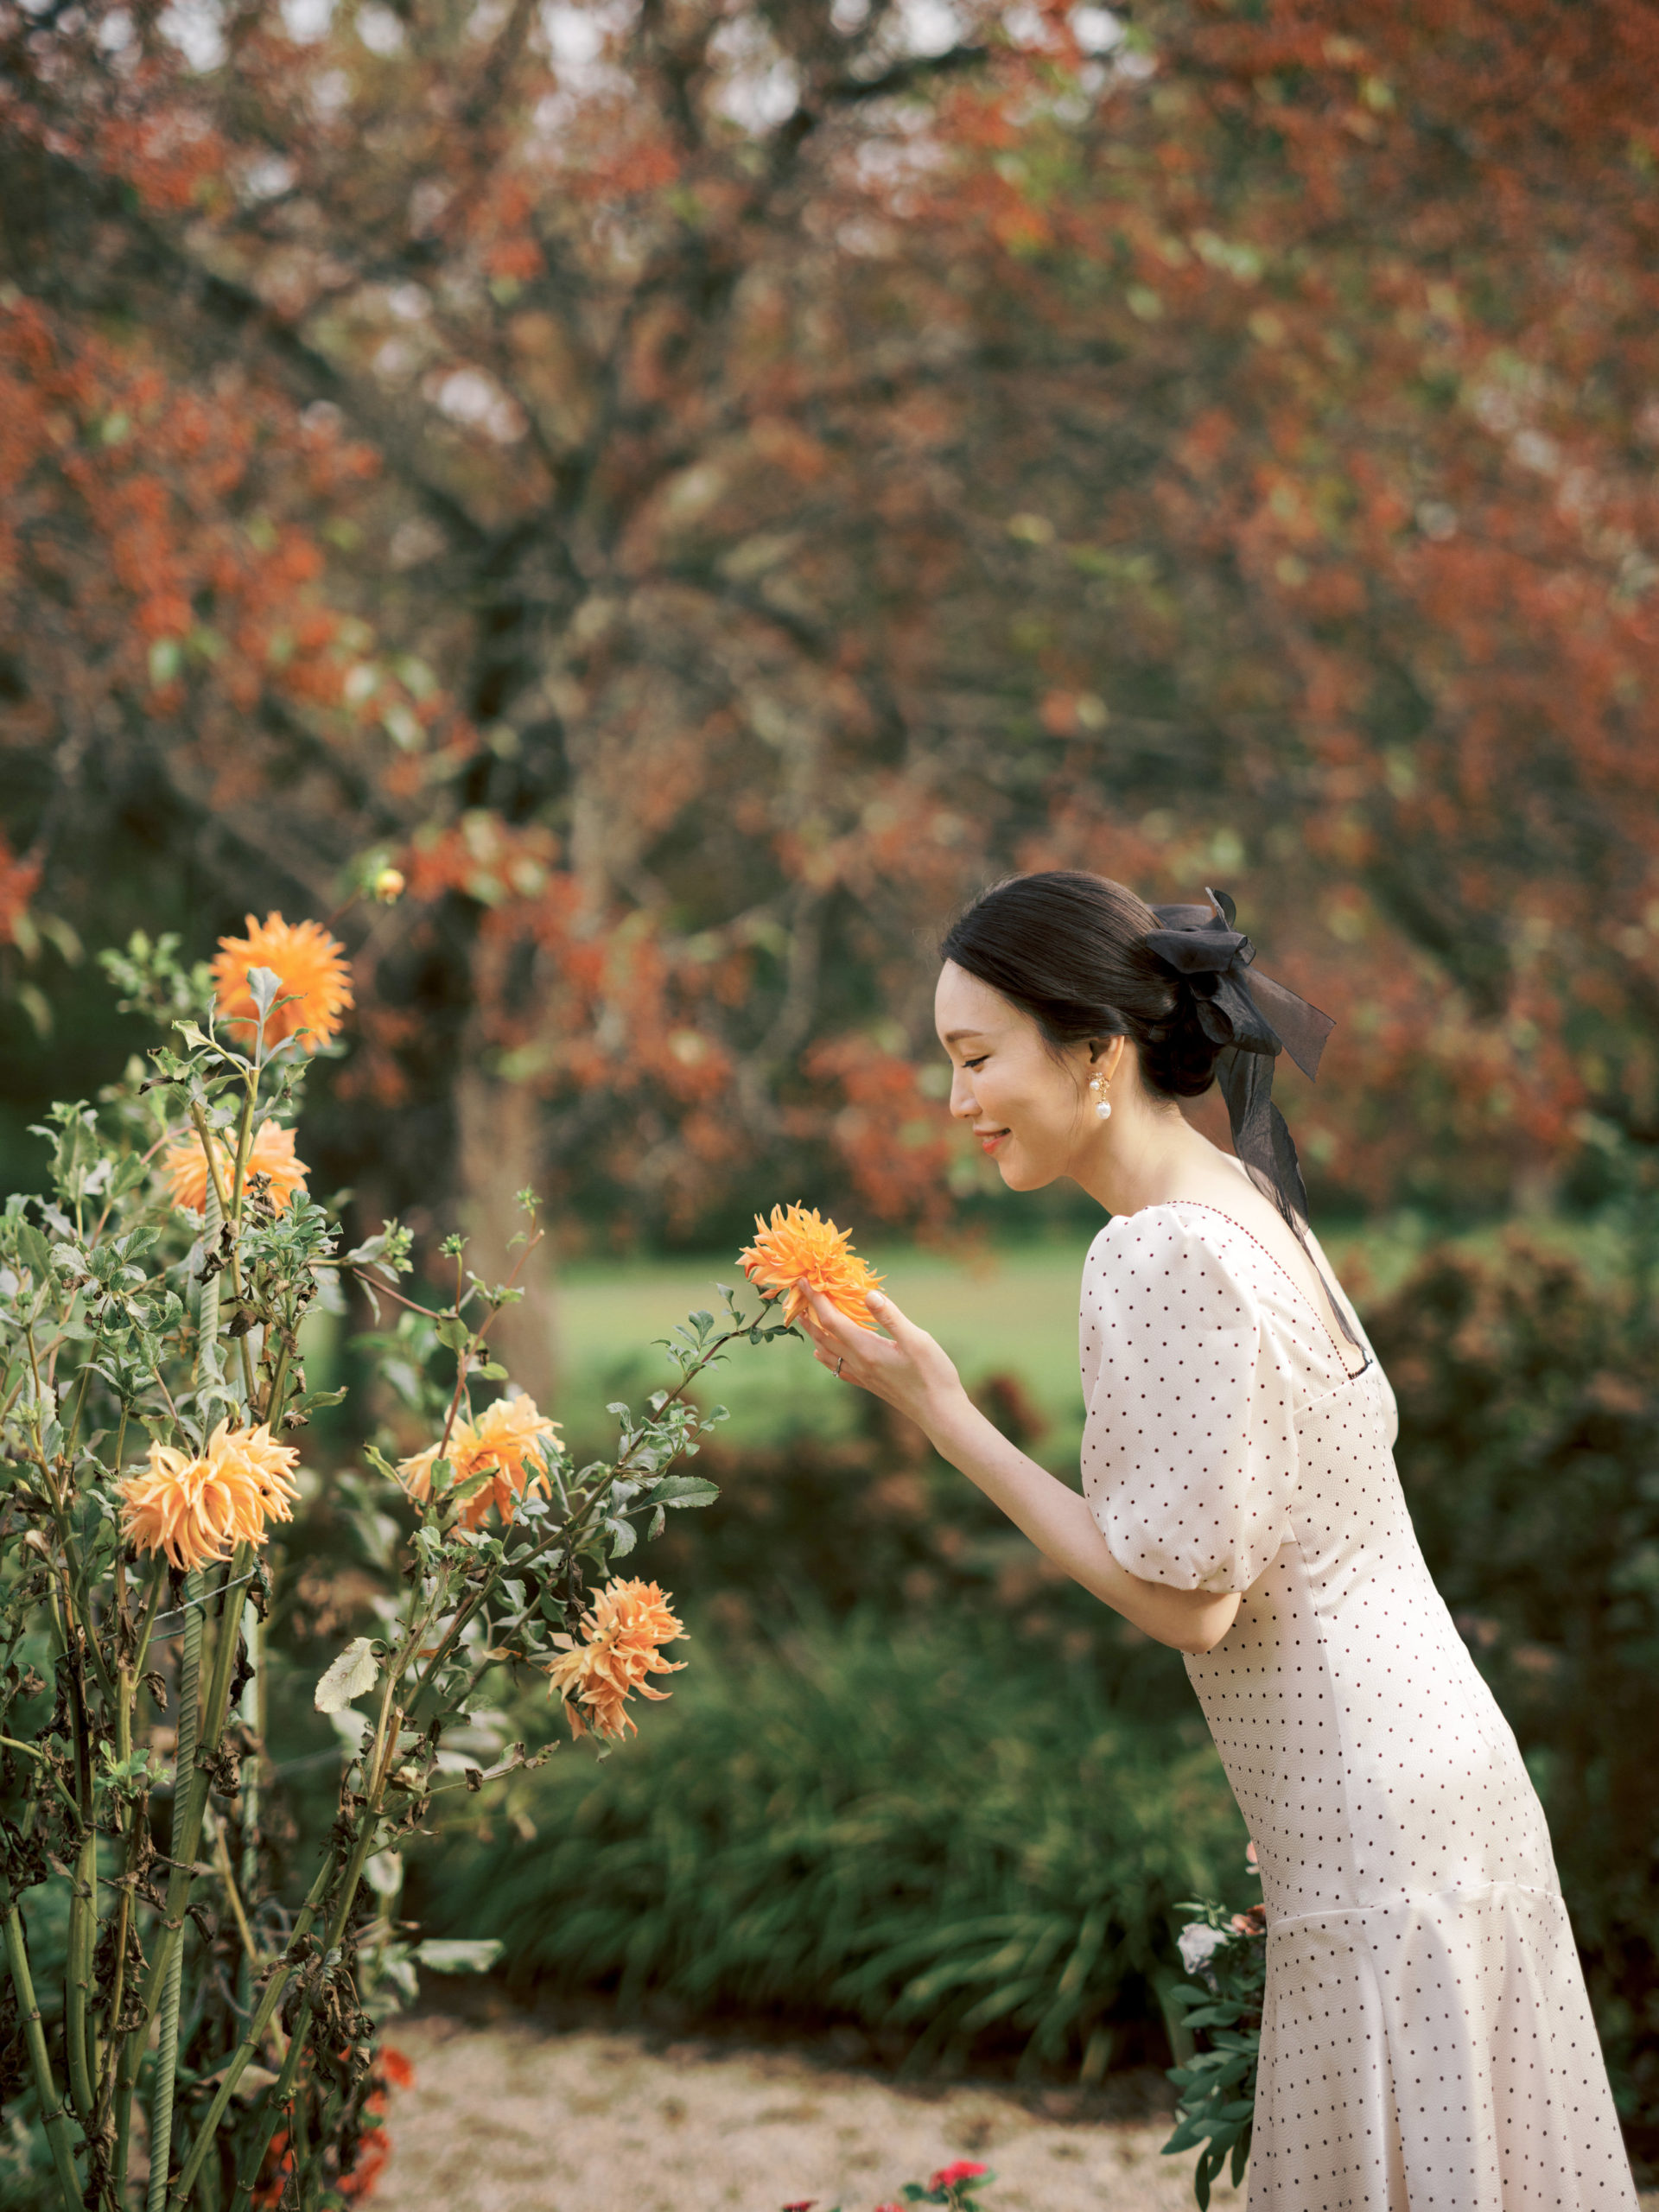 The fiancée is happily holding the flower at Planting Fields Arboretum, NY. Engagement session photo by Jenny Fu Studio 